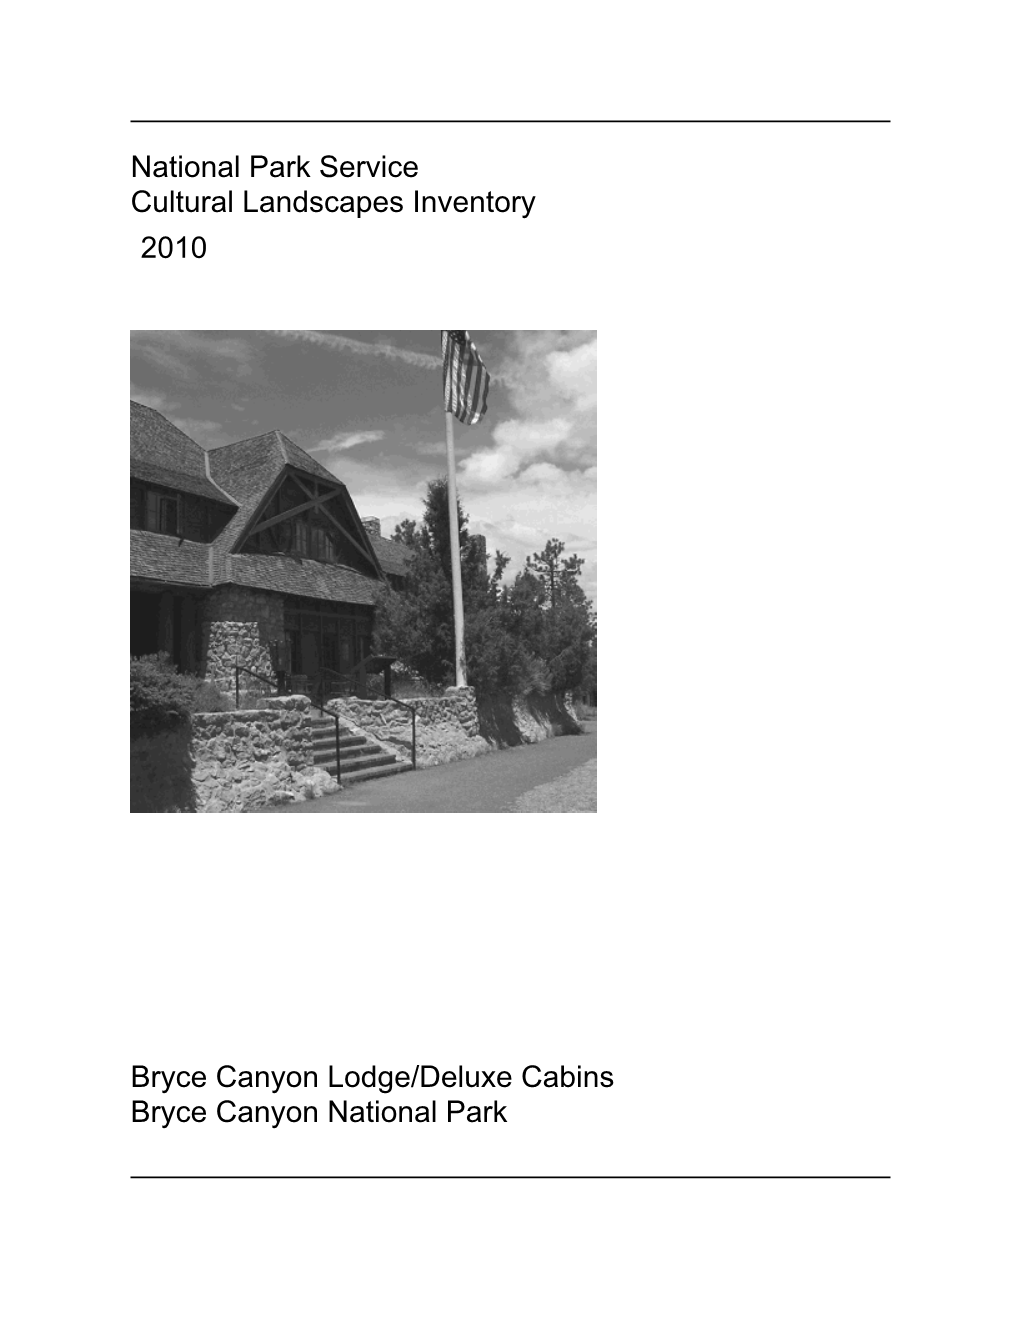 Cultural Landscapes Inventory: Bryce Canyon Lodge/Deluxe Cabins